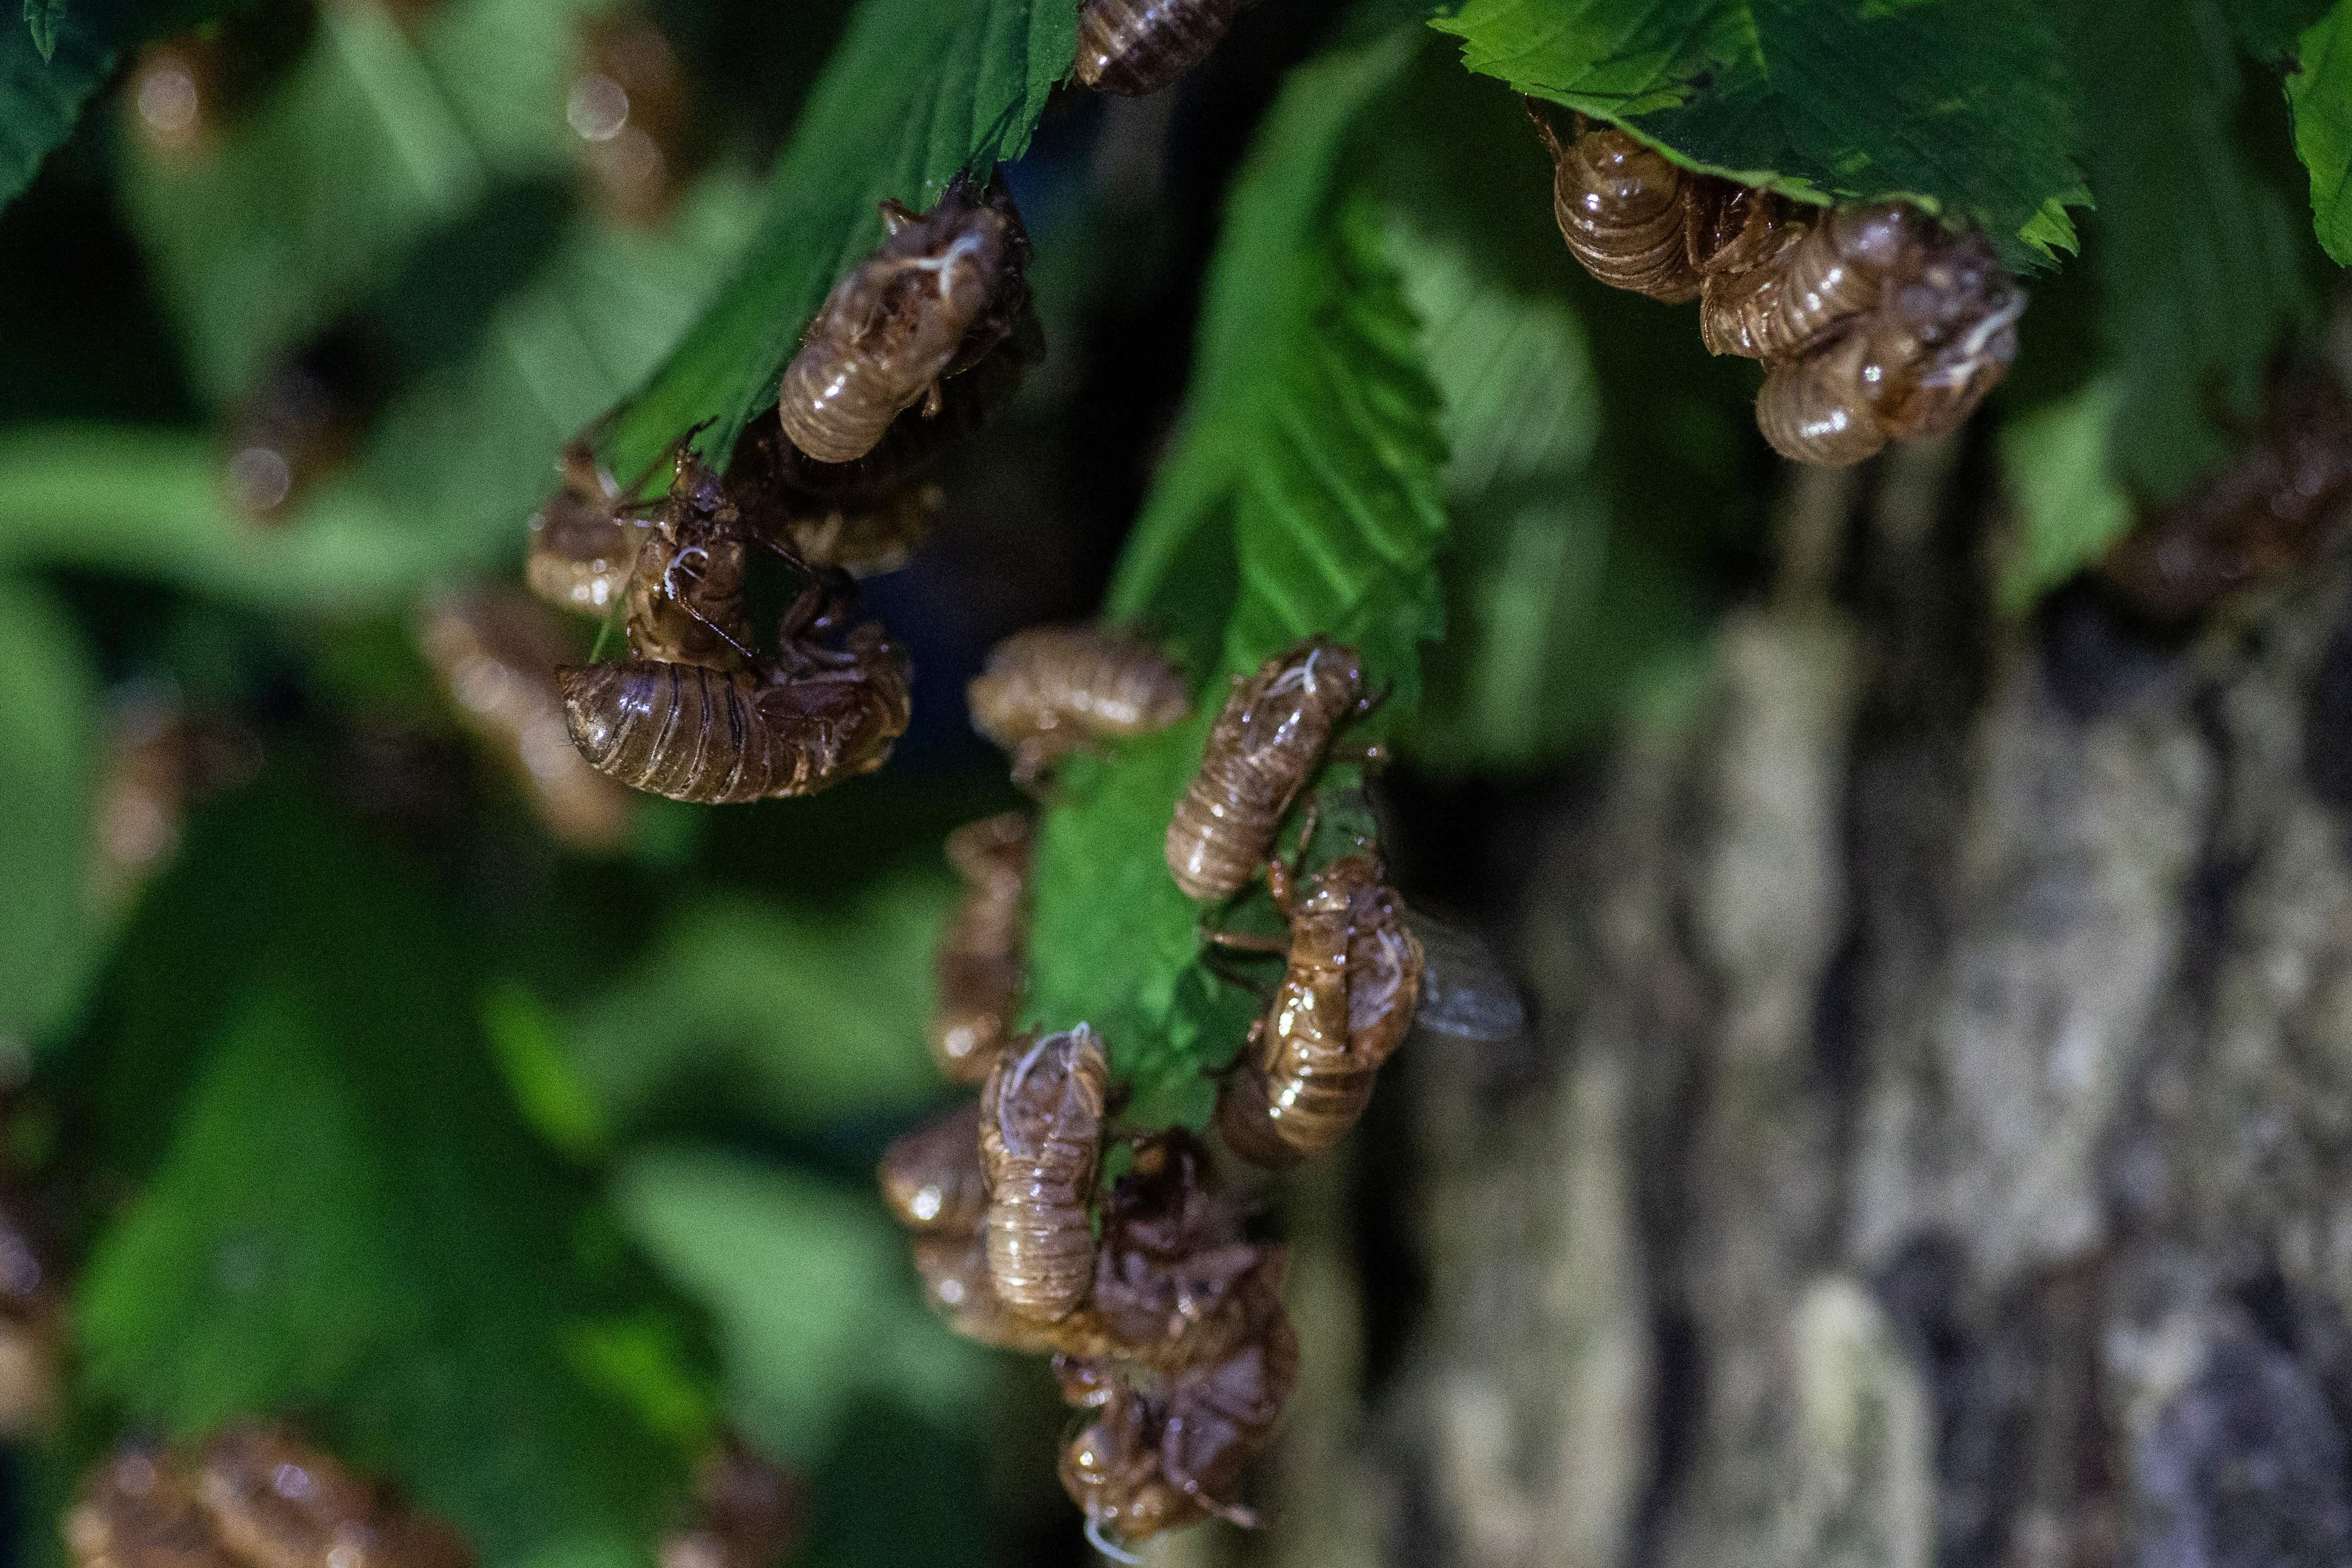 The shells of cicada nymphs are seen on leaves at night
